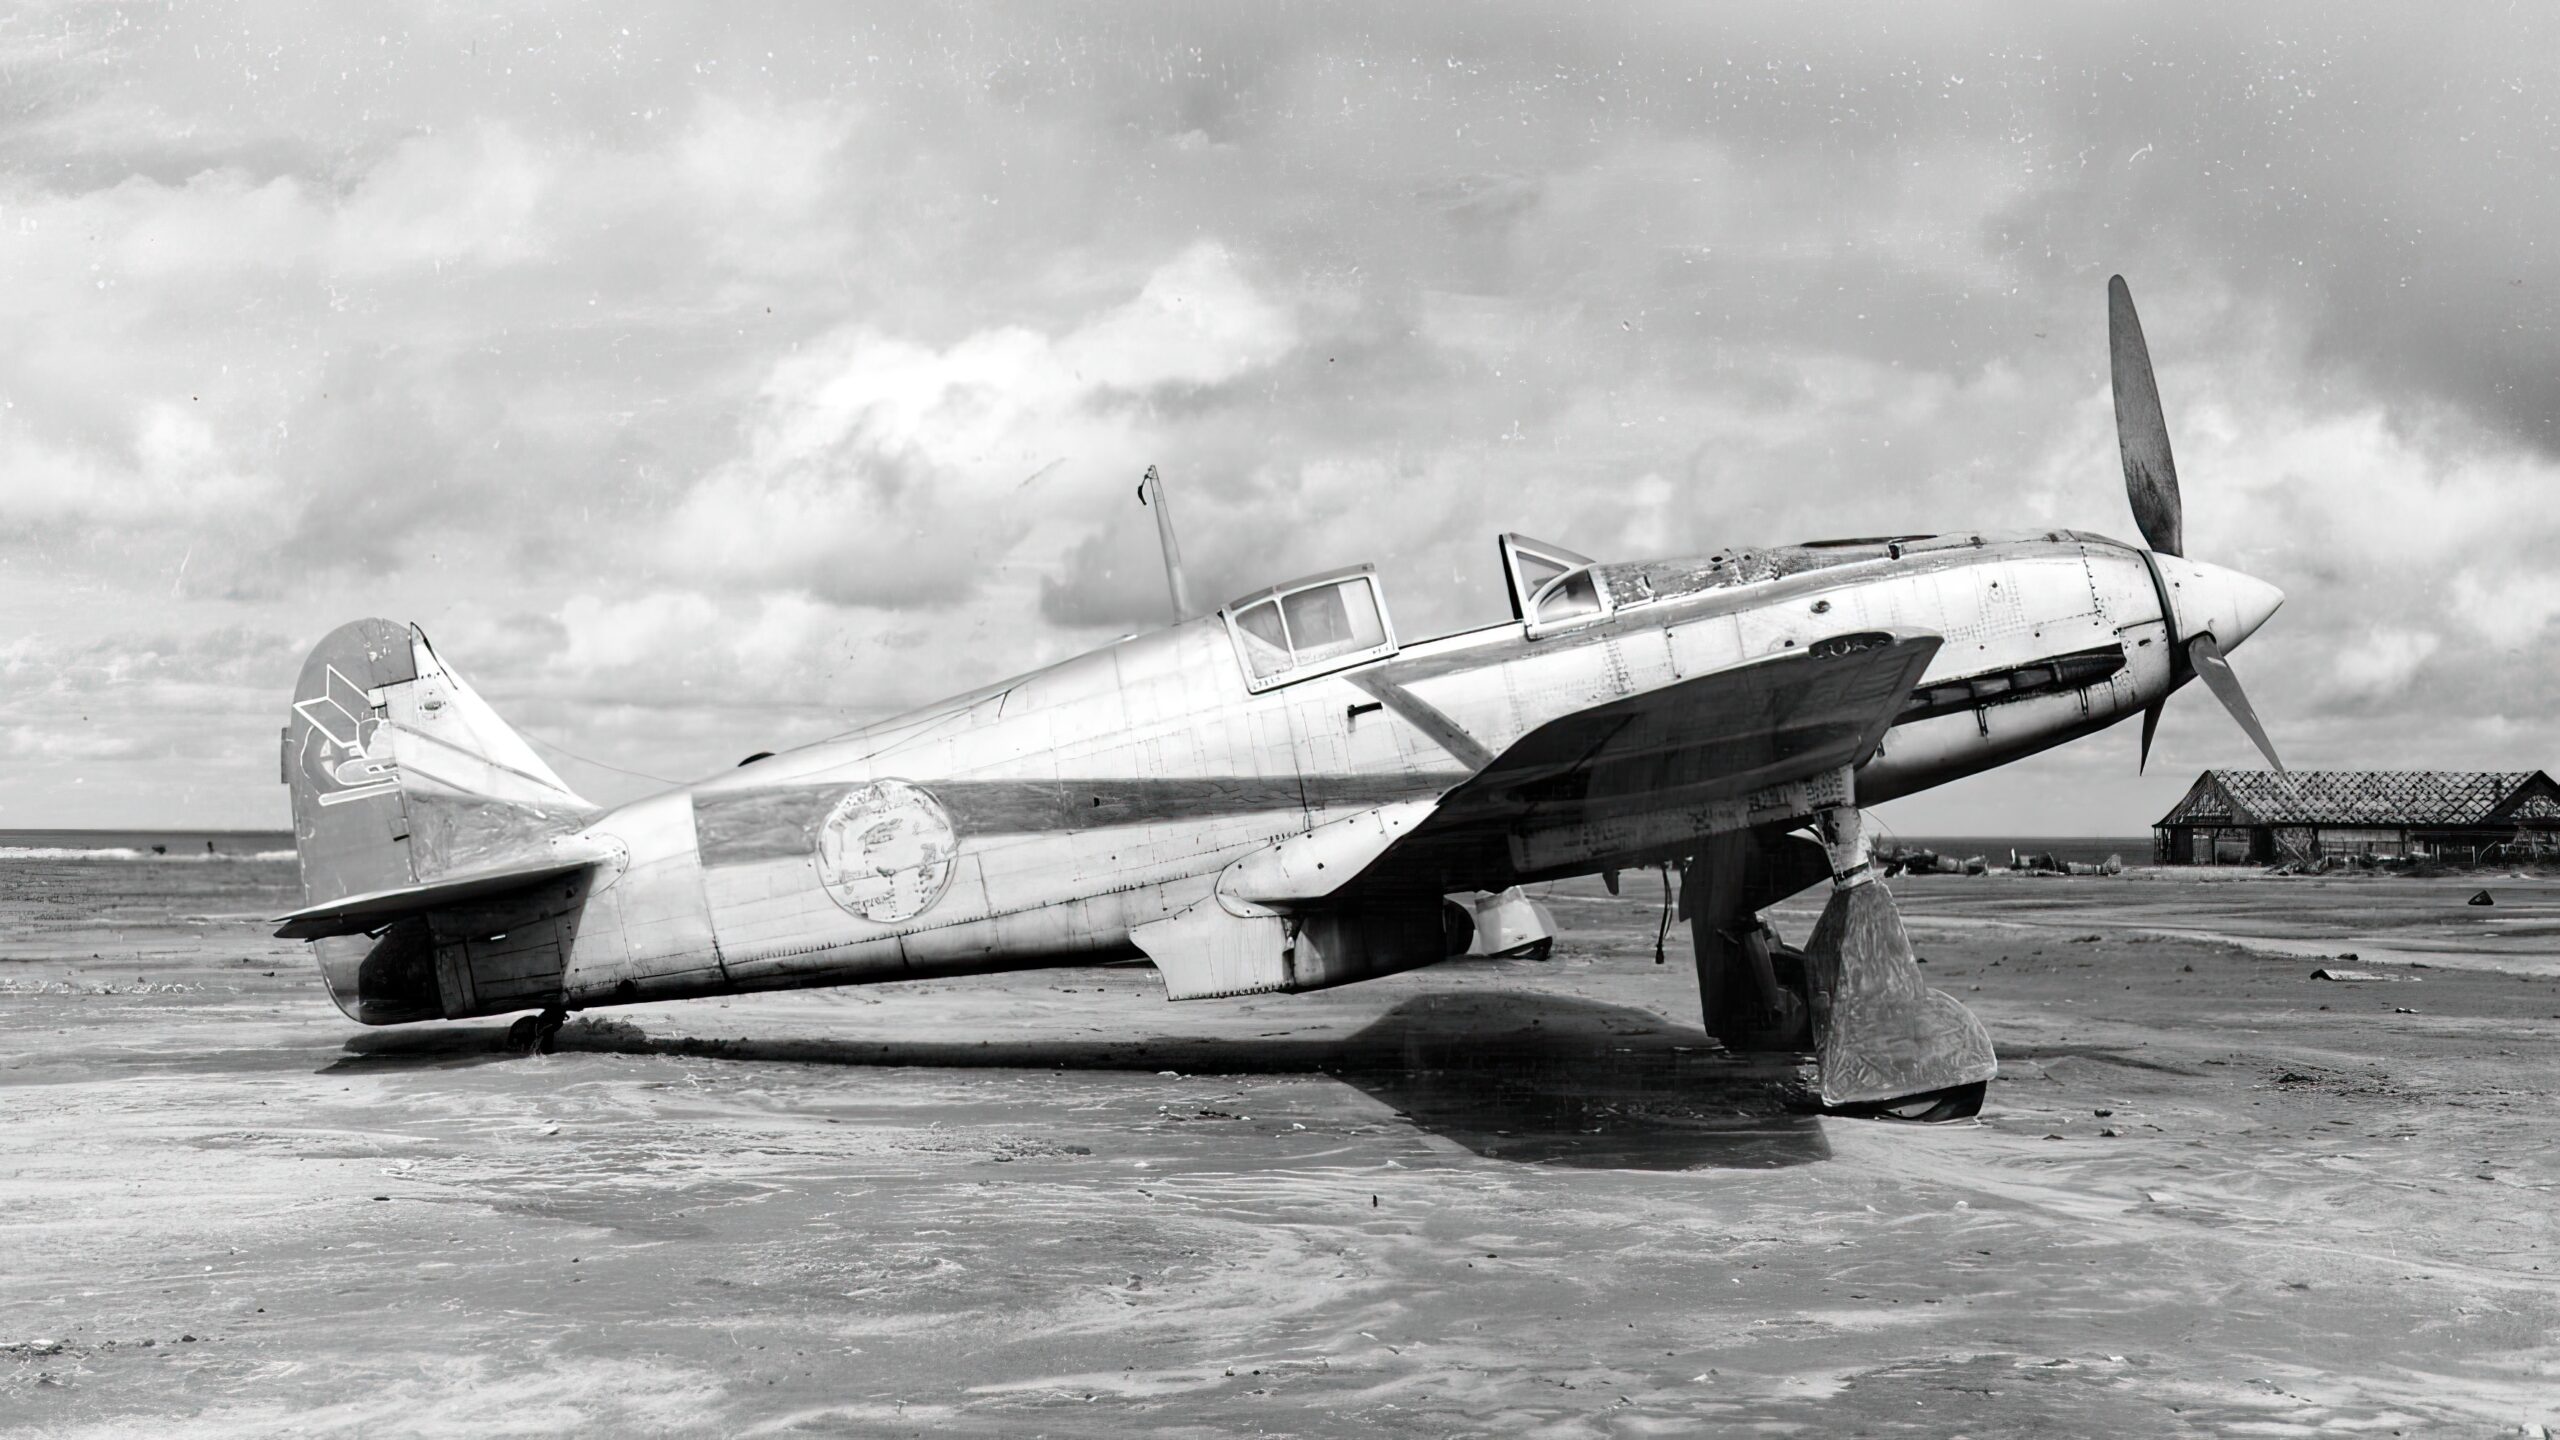 A Ki-61 of the 149th shumbutai, taken in Ashiya after the war. The tail markings indicate it formerly came from the Akeno Kyodo Hikoshidan and the 59th sentai before being allocated to the 149th